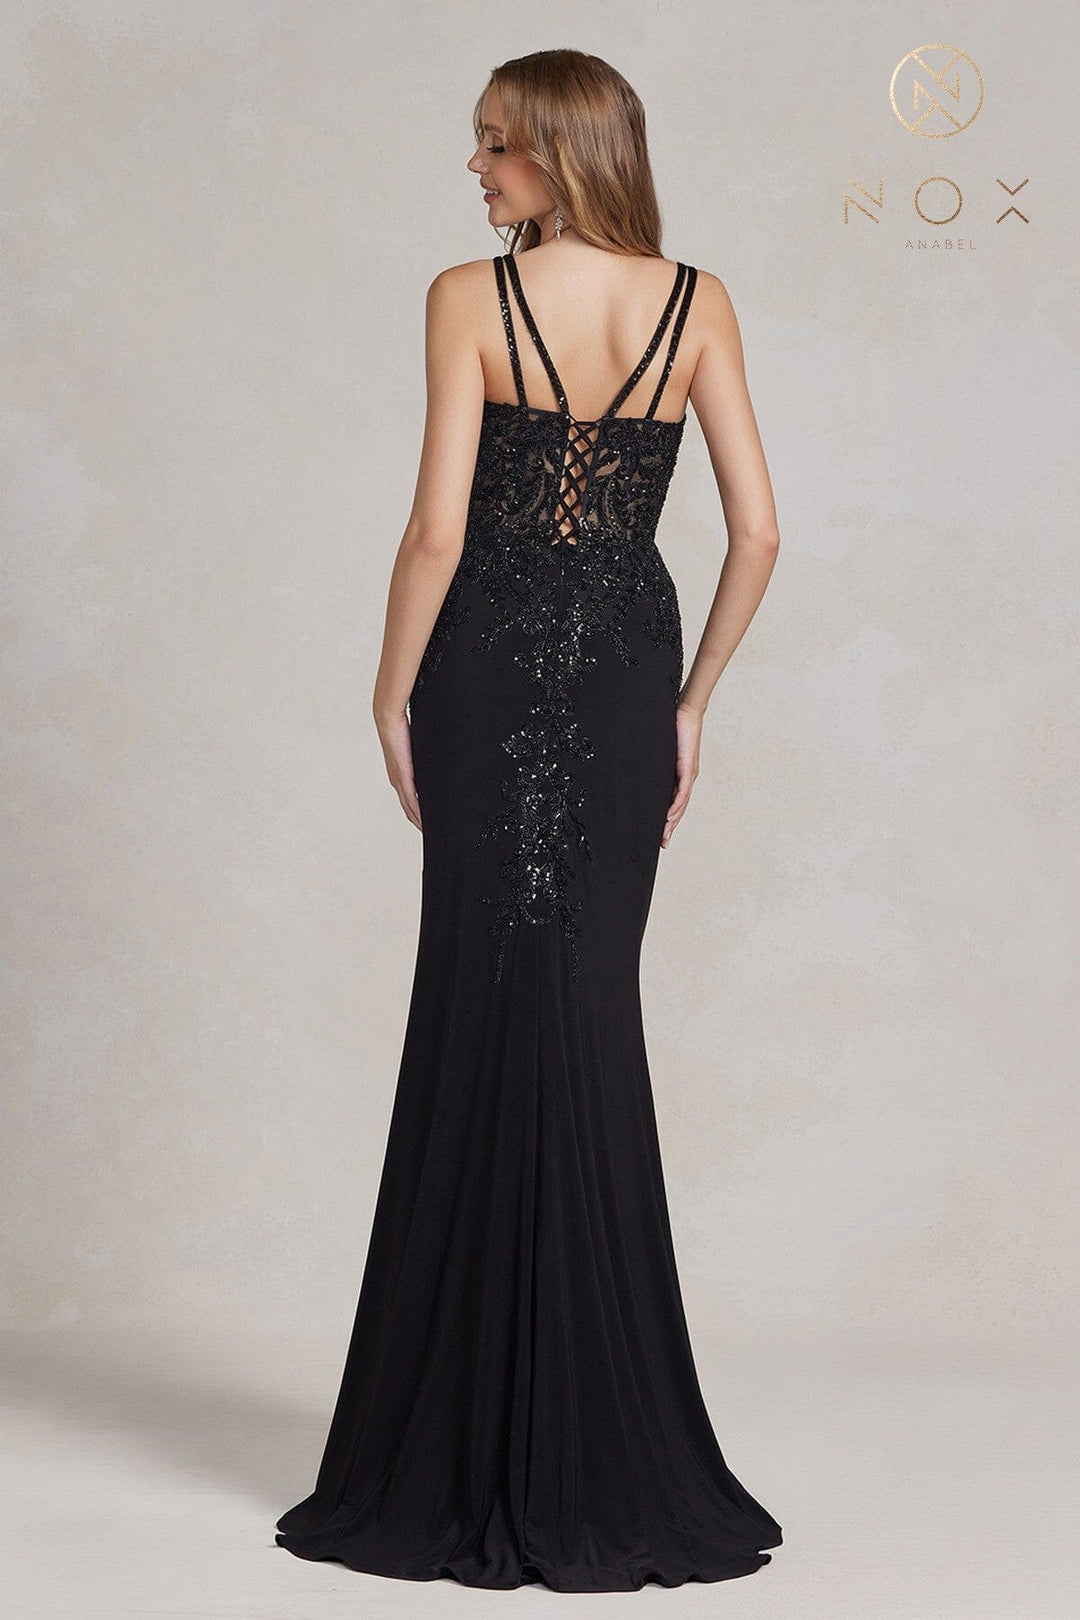 Fitted Embroidered V-Neck Gown by Nox Anabel H1090 - Outlet